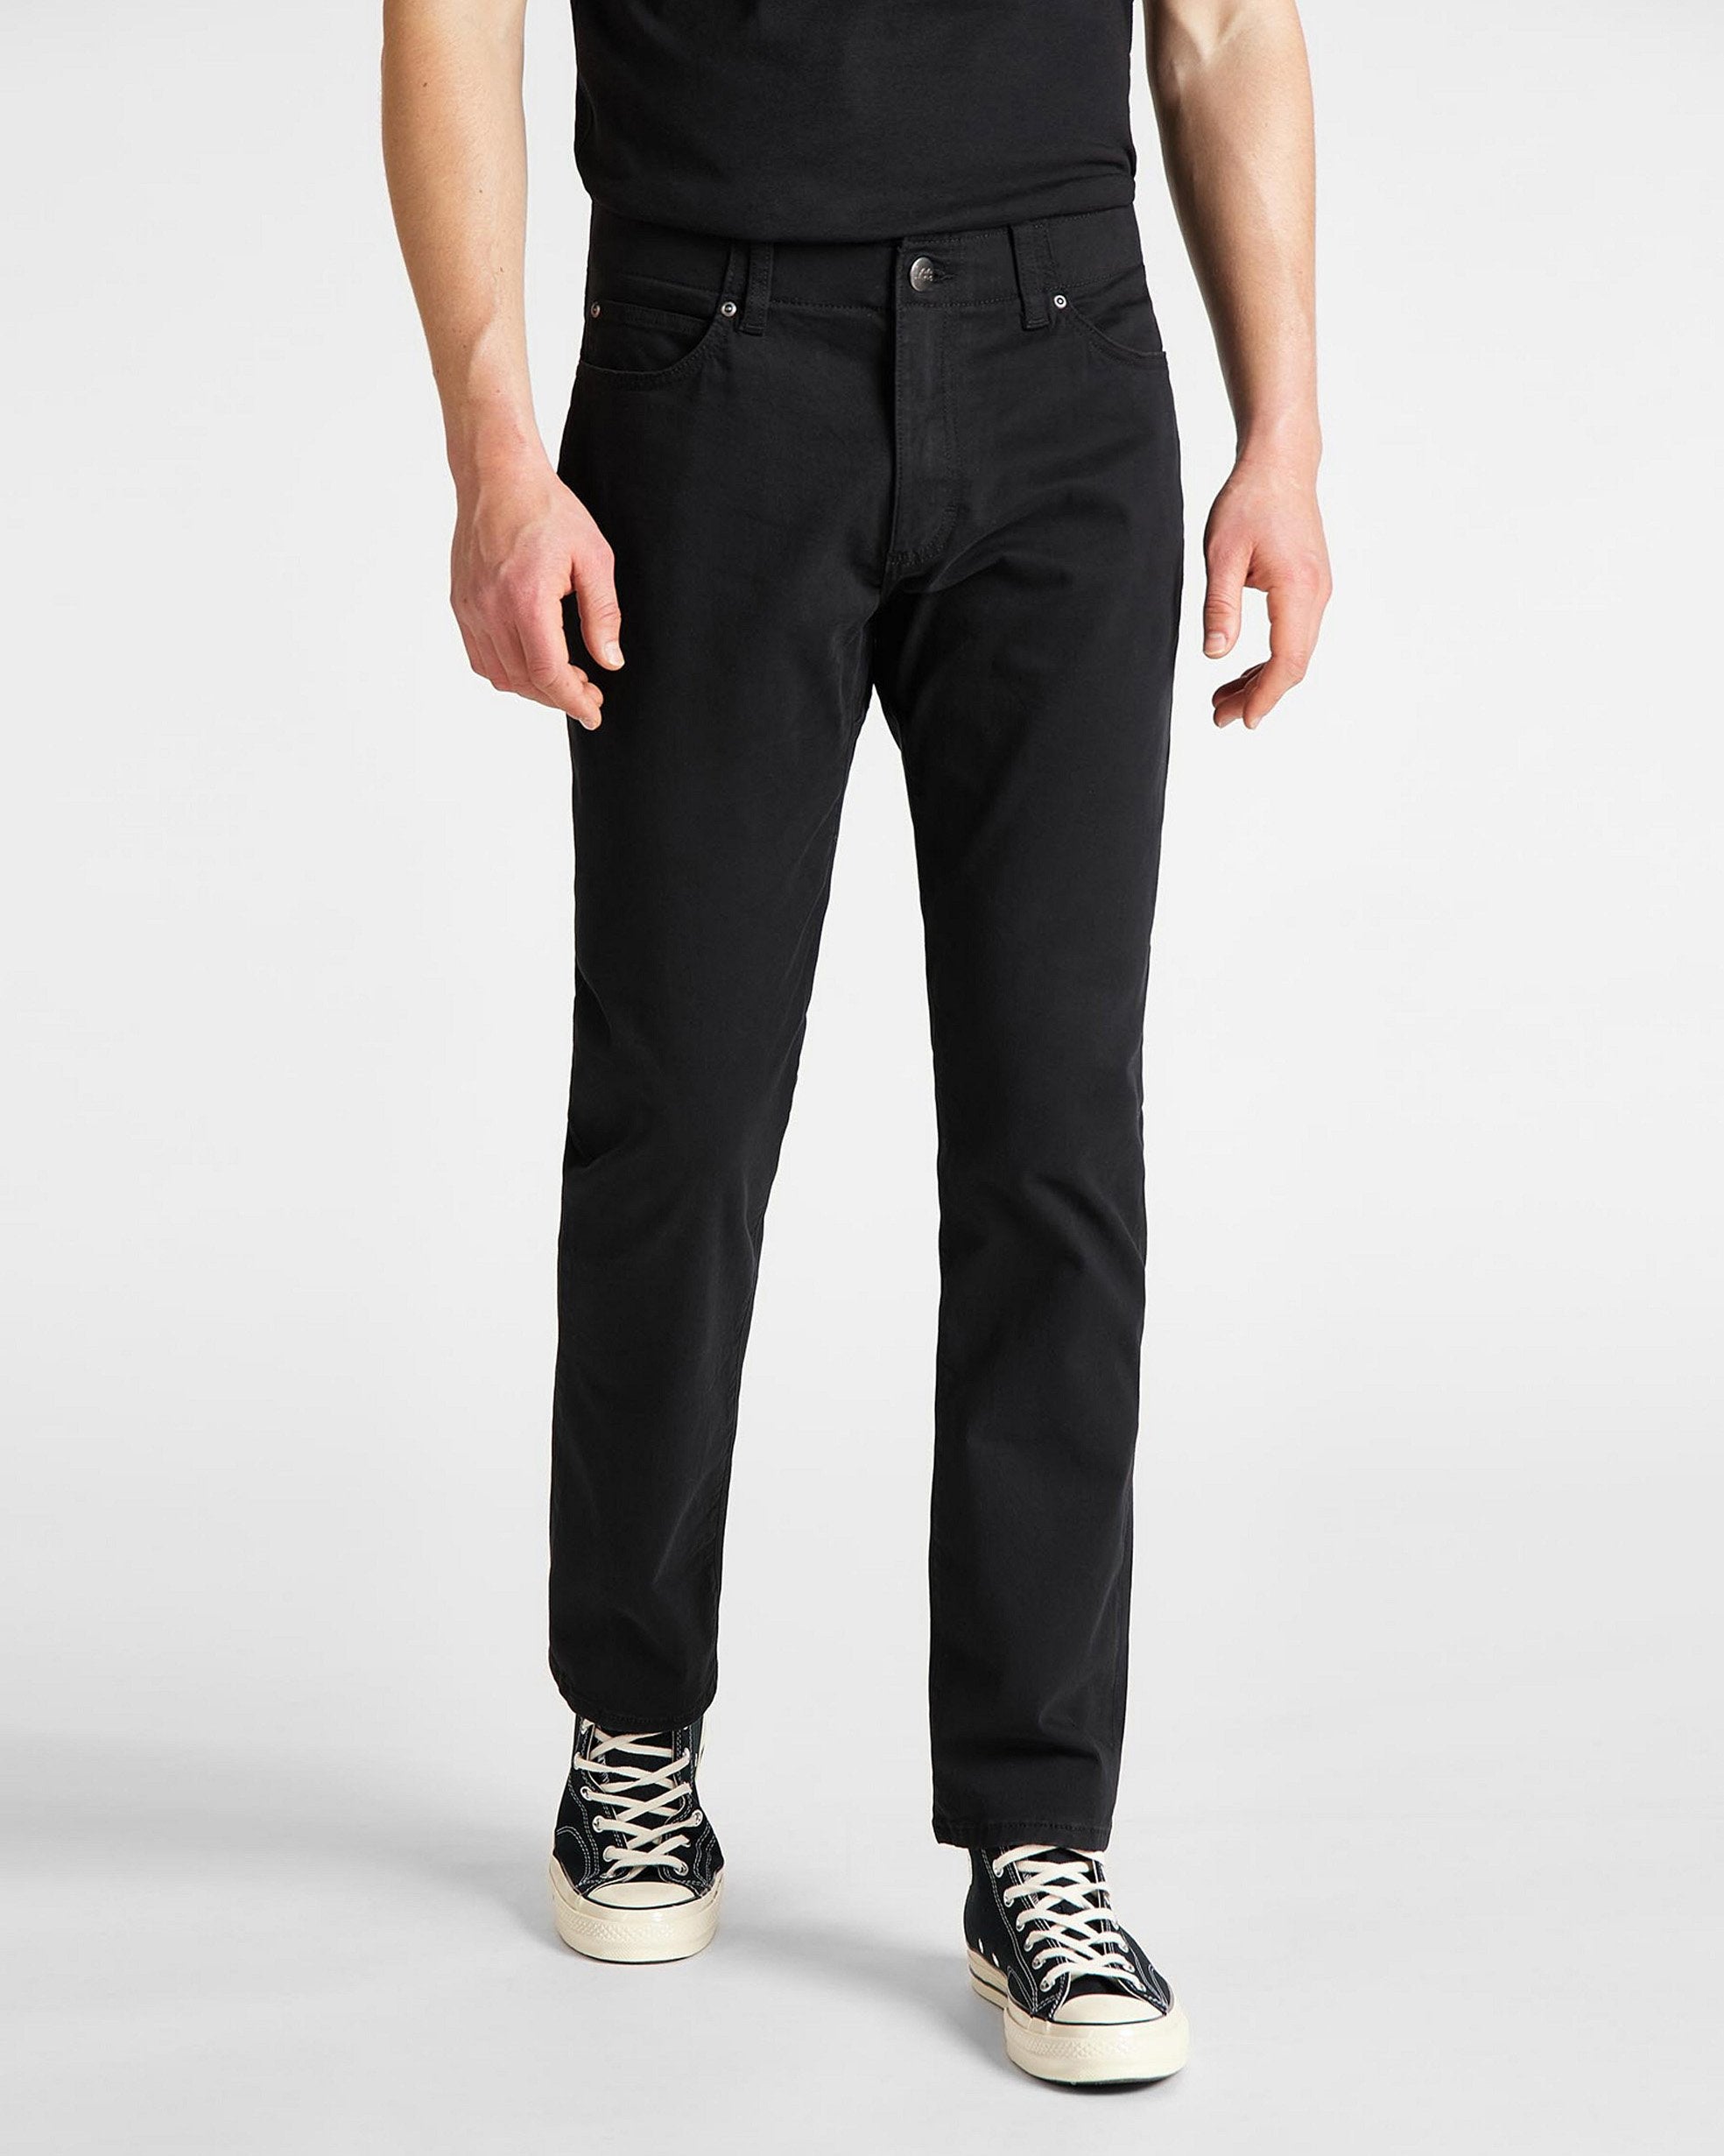 lee straight fit extreme motion mens cotton twill trousers black w30 l30 l71wtf0130s 5400852657950 lee chinos non denim pants 29775523086530